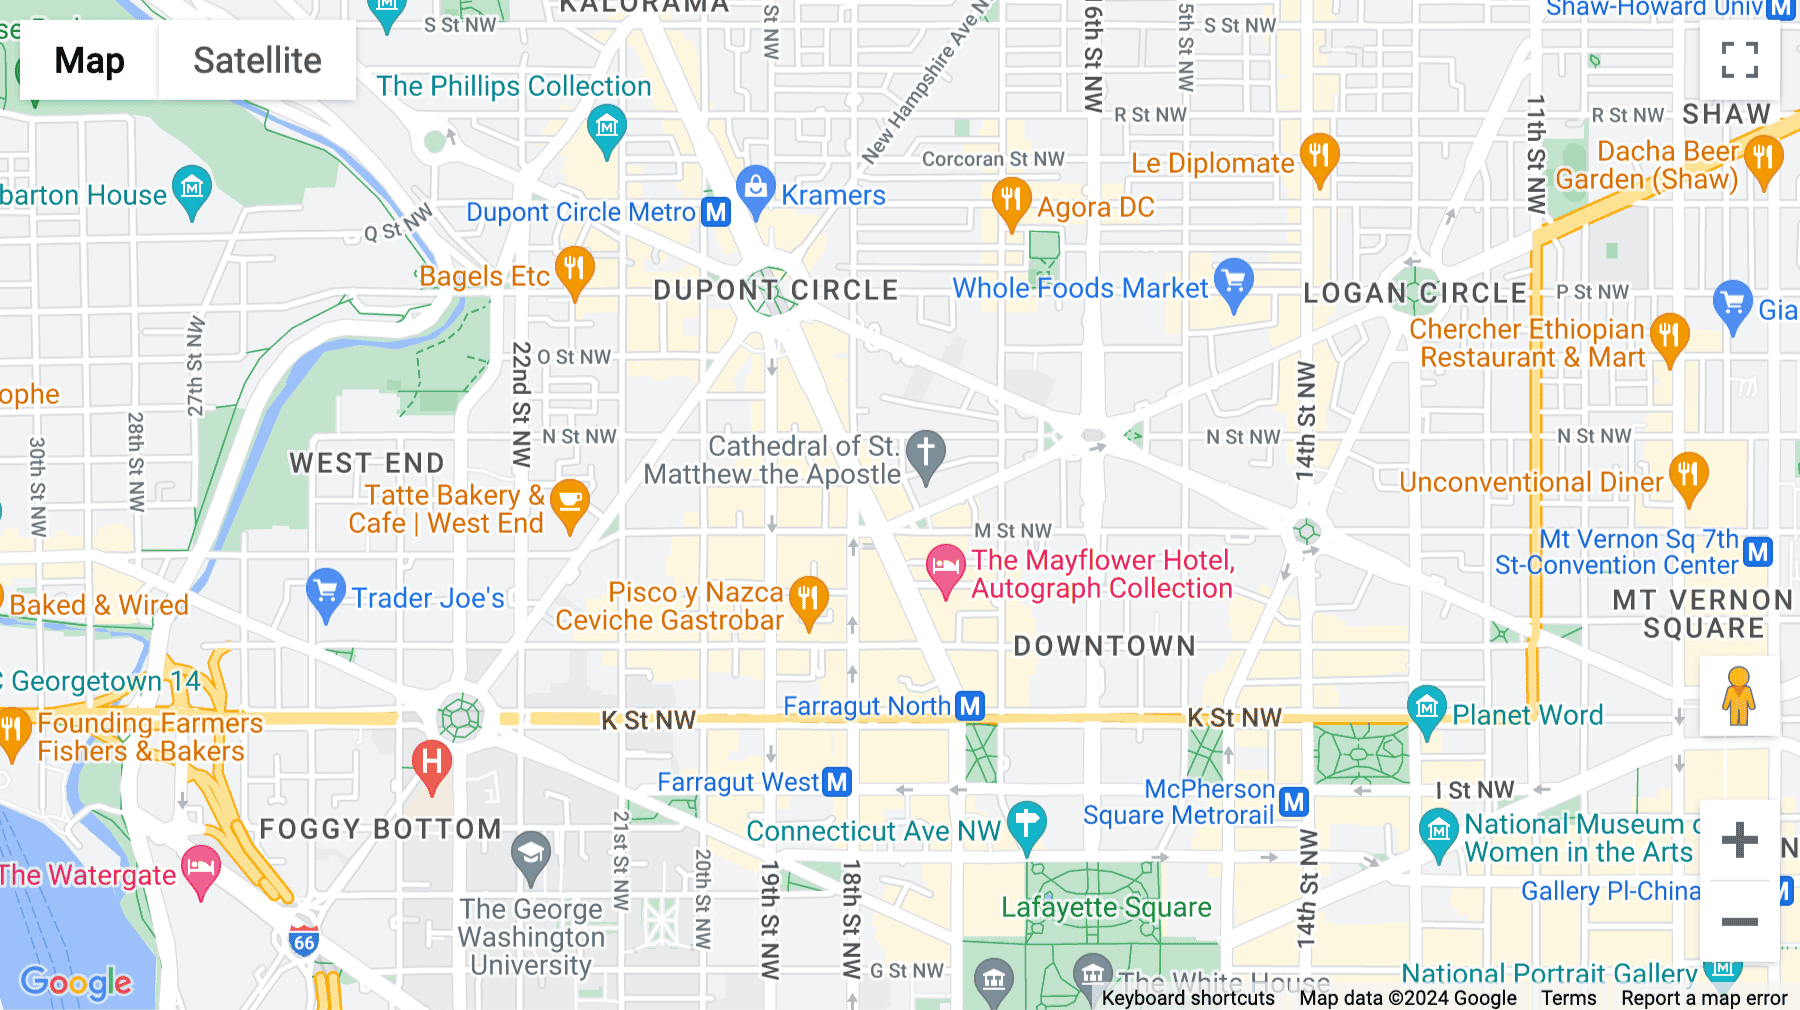 Click for interative map of 1201 Connecticut Ave NW, Washington DC